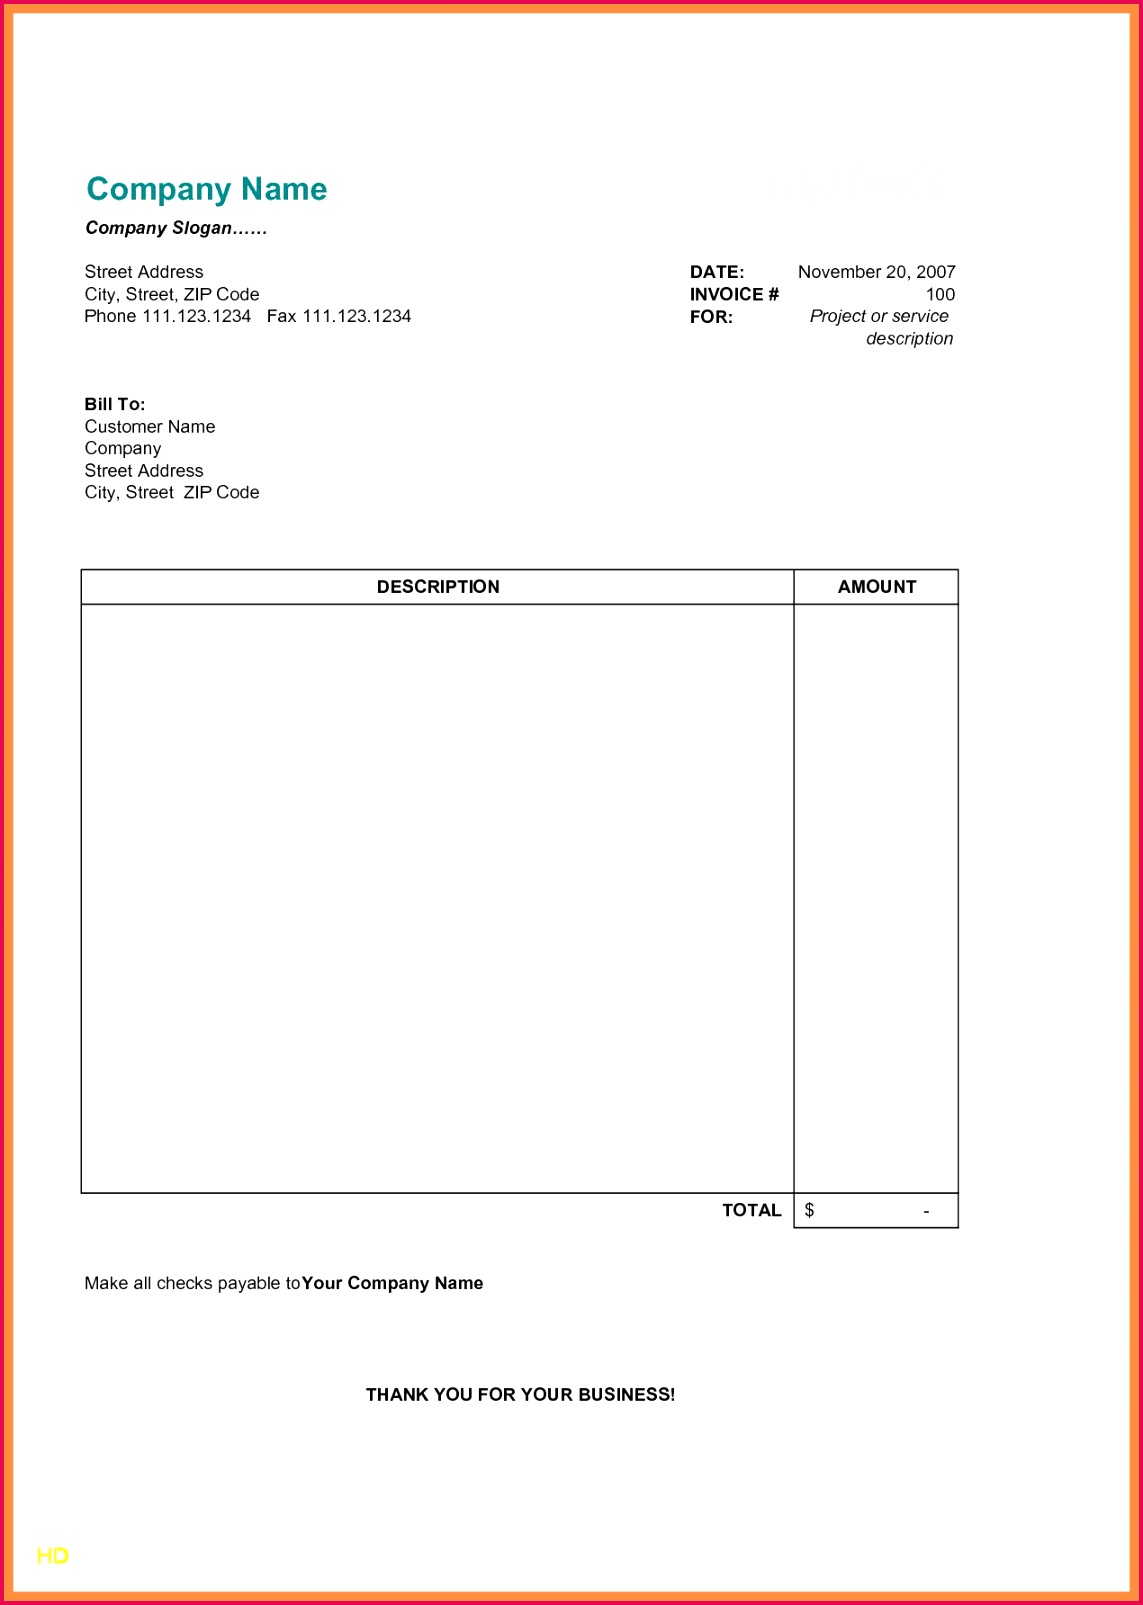 Free Invoice Template Simple Blank Invoice Home Business Invoice software Fresh ¢†¡ Dictionary Template 0d